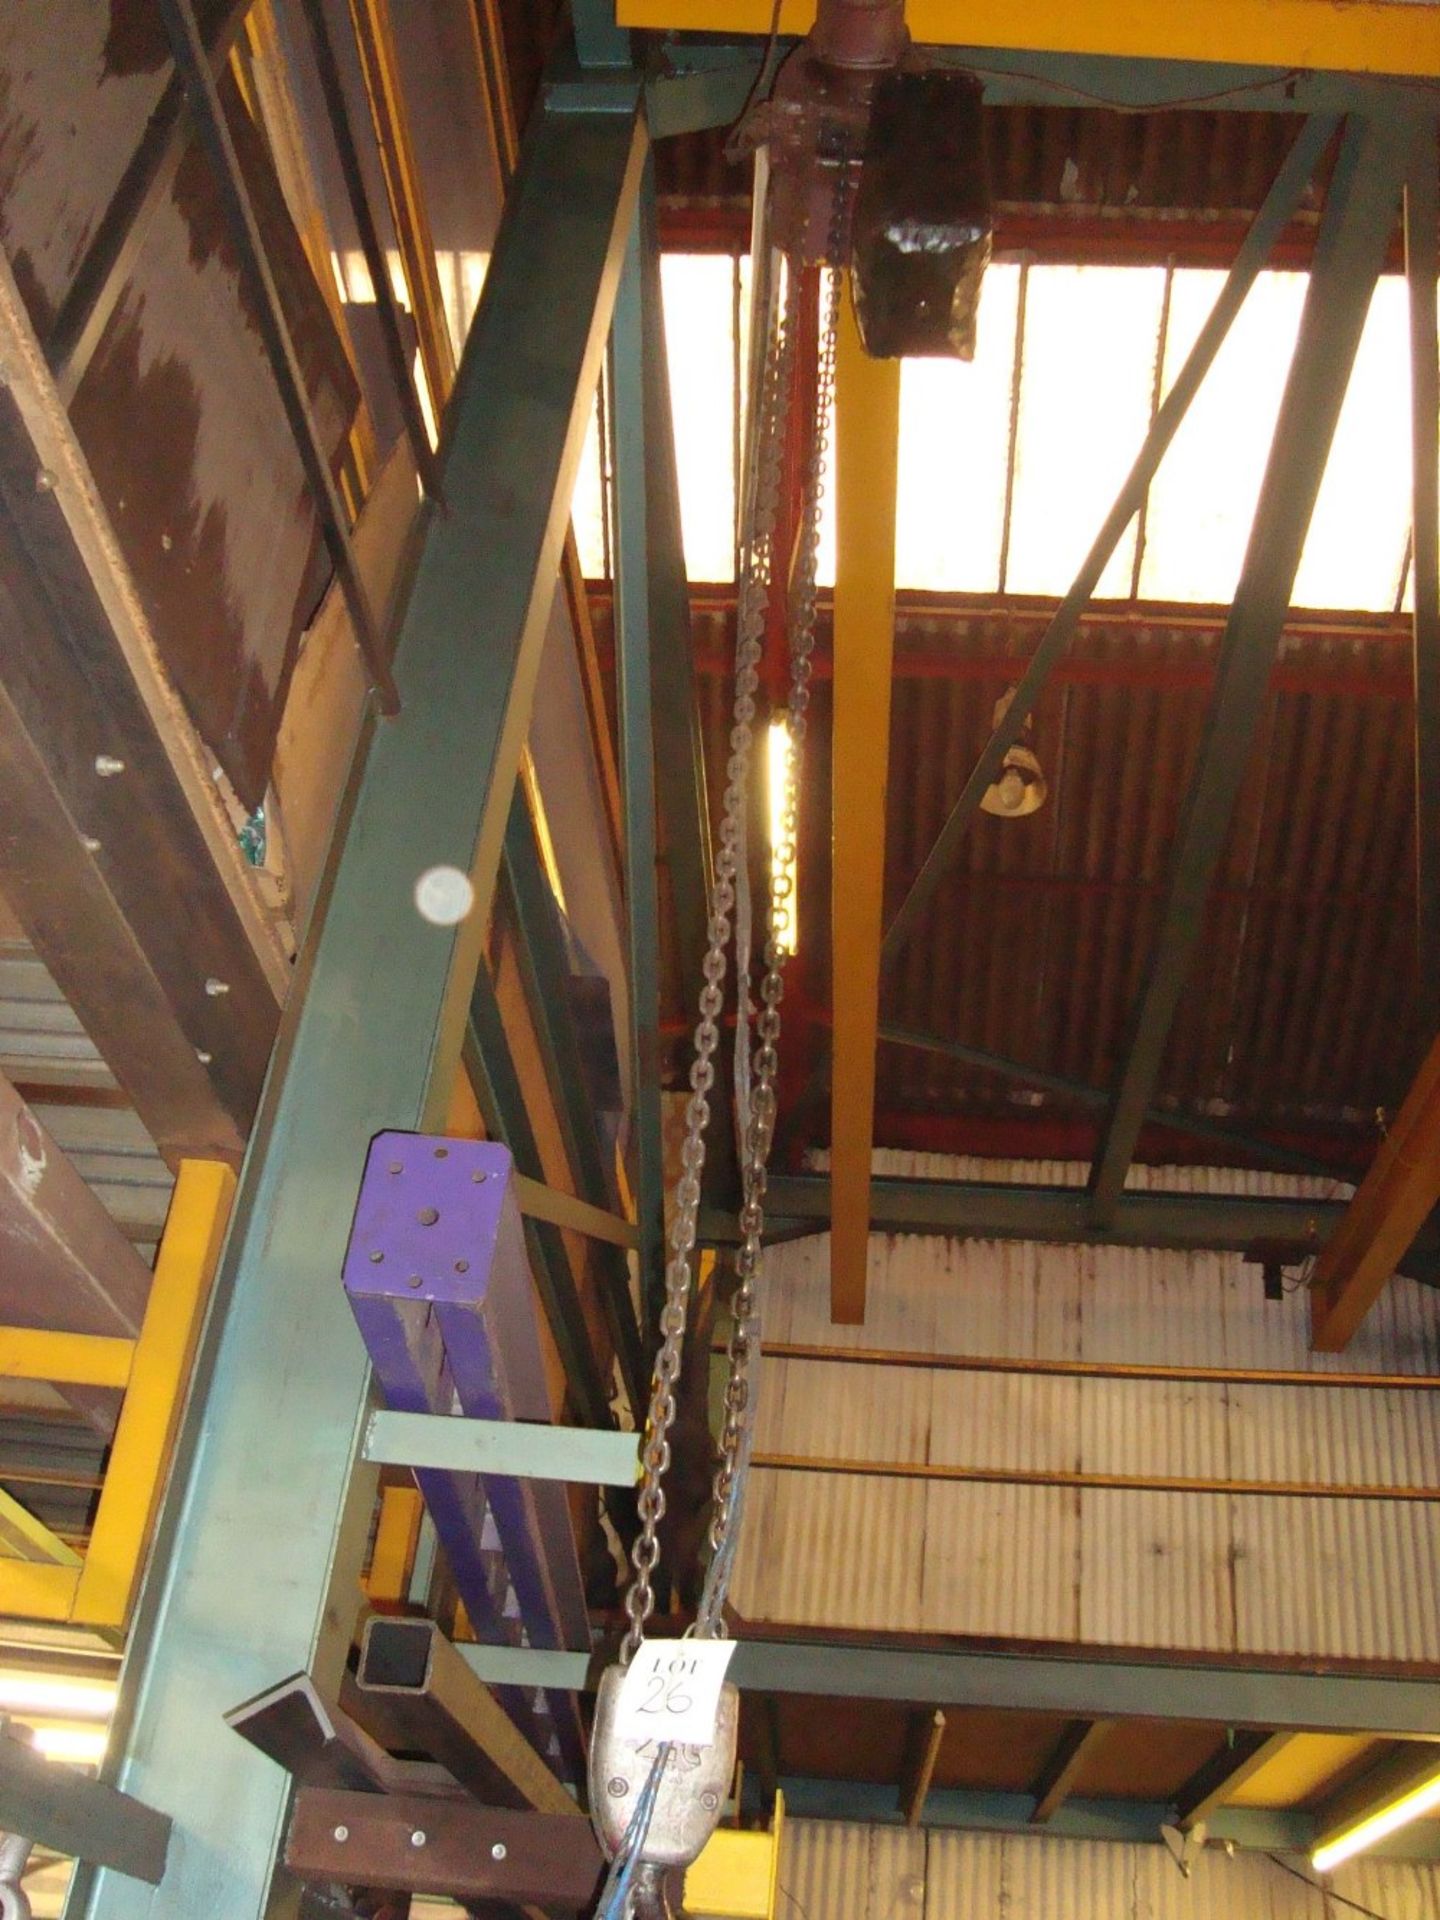 A two tonne electric chain hoist with beam runners and pendant control (METHOD STATEMENT AND RISK